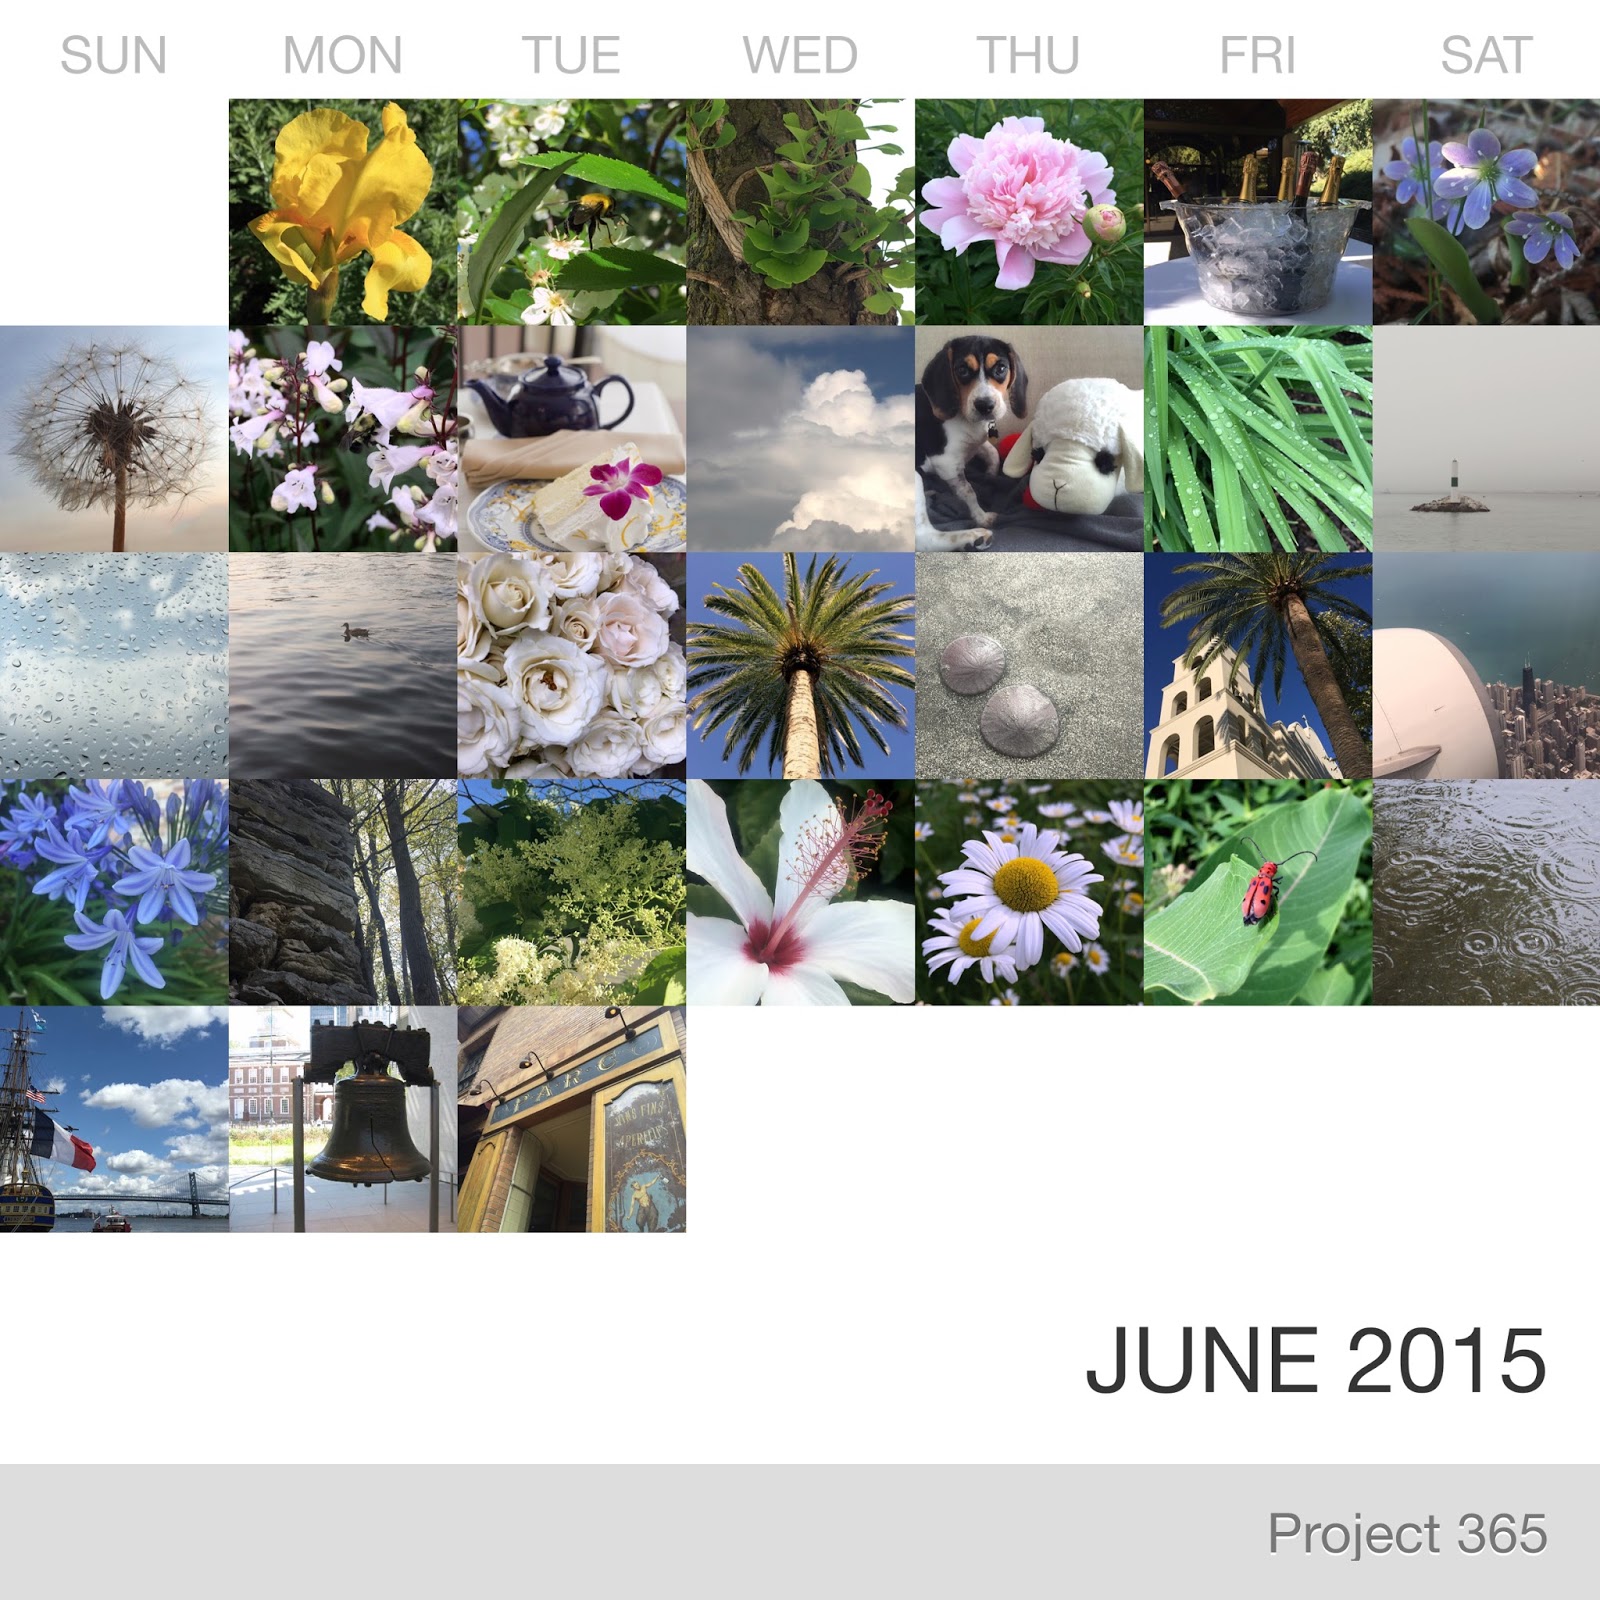 Project 365 _June-2015_Collage 2.jpg